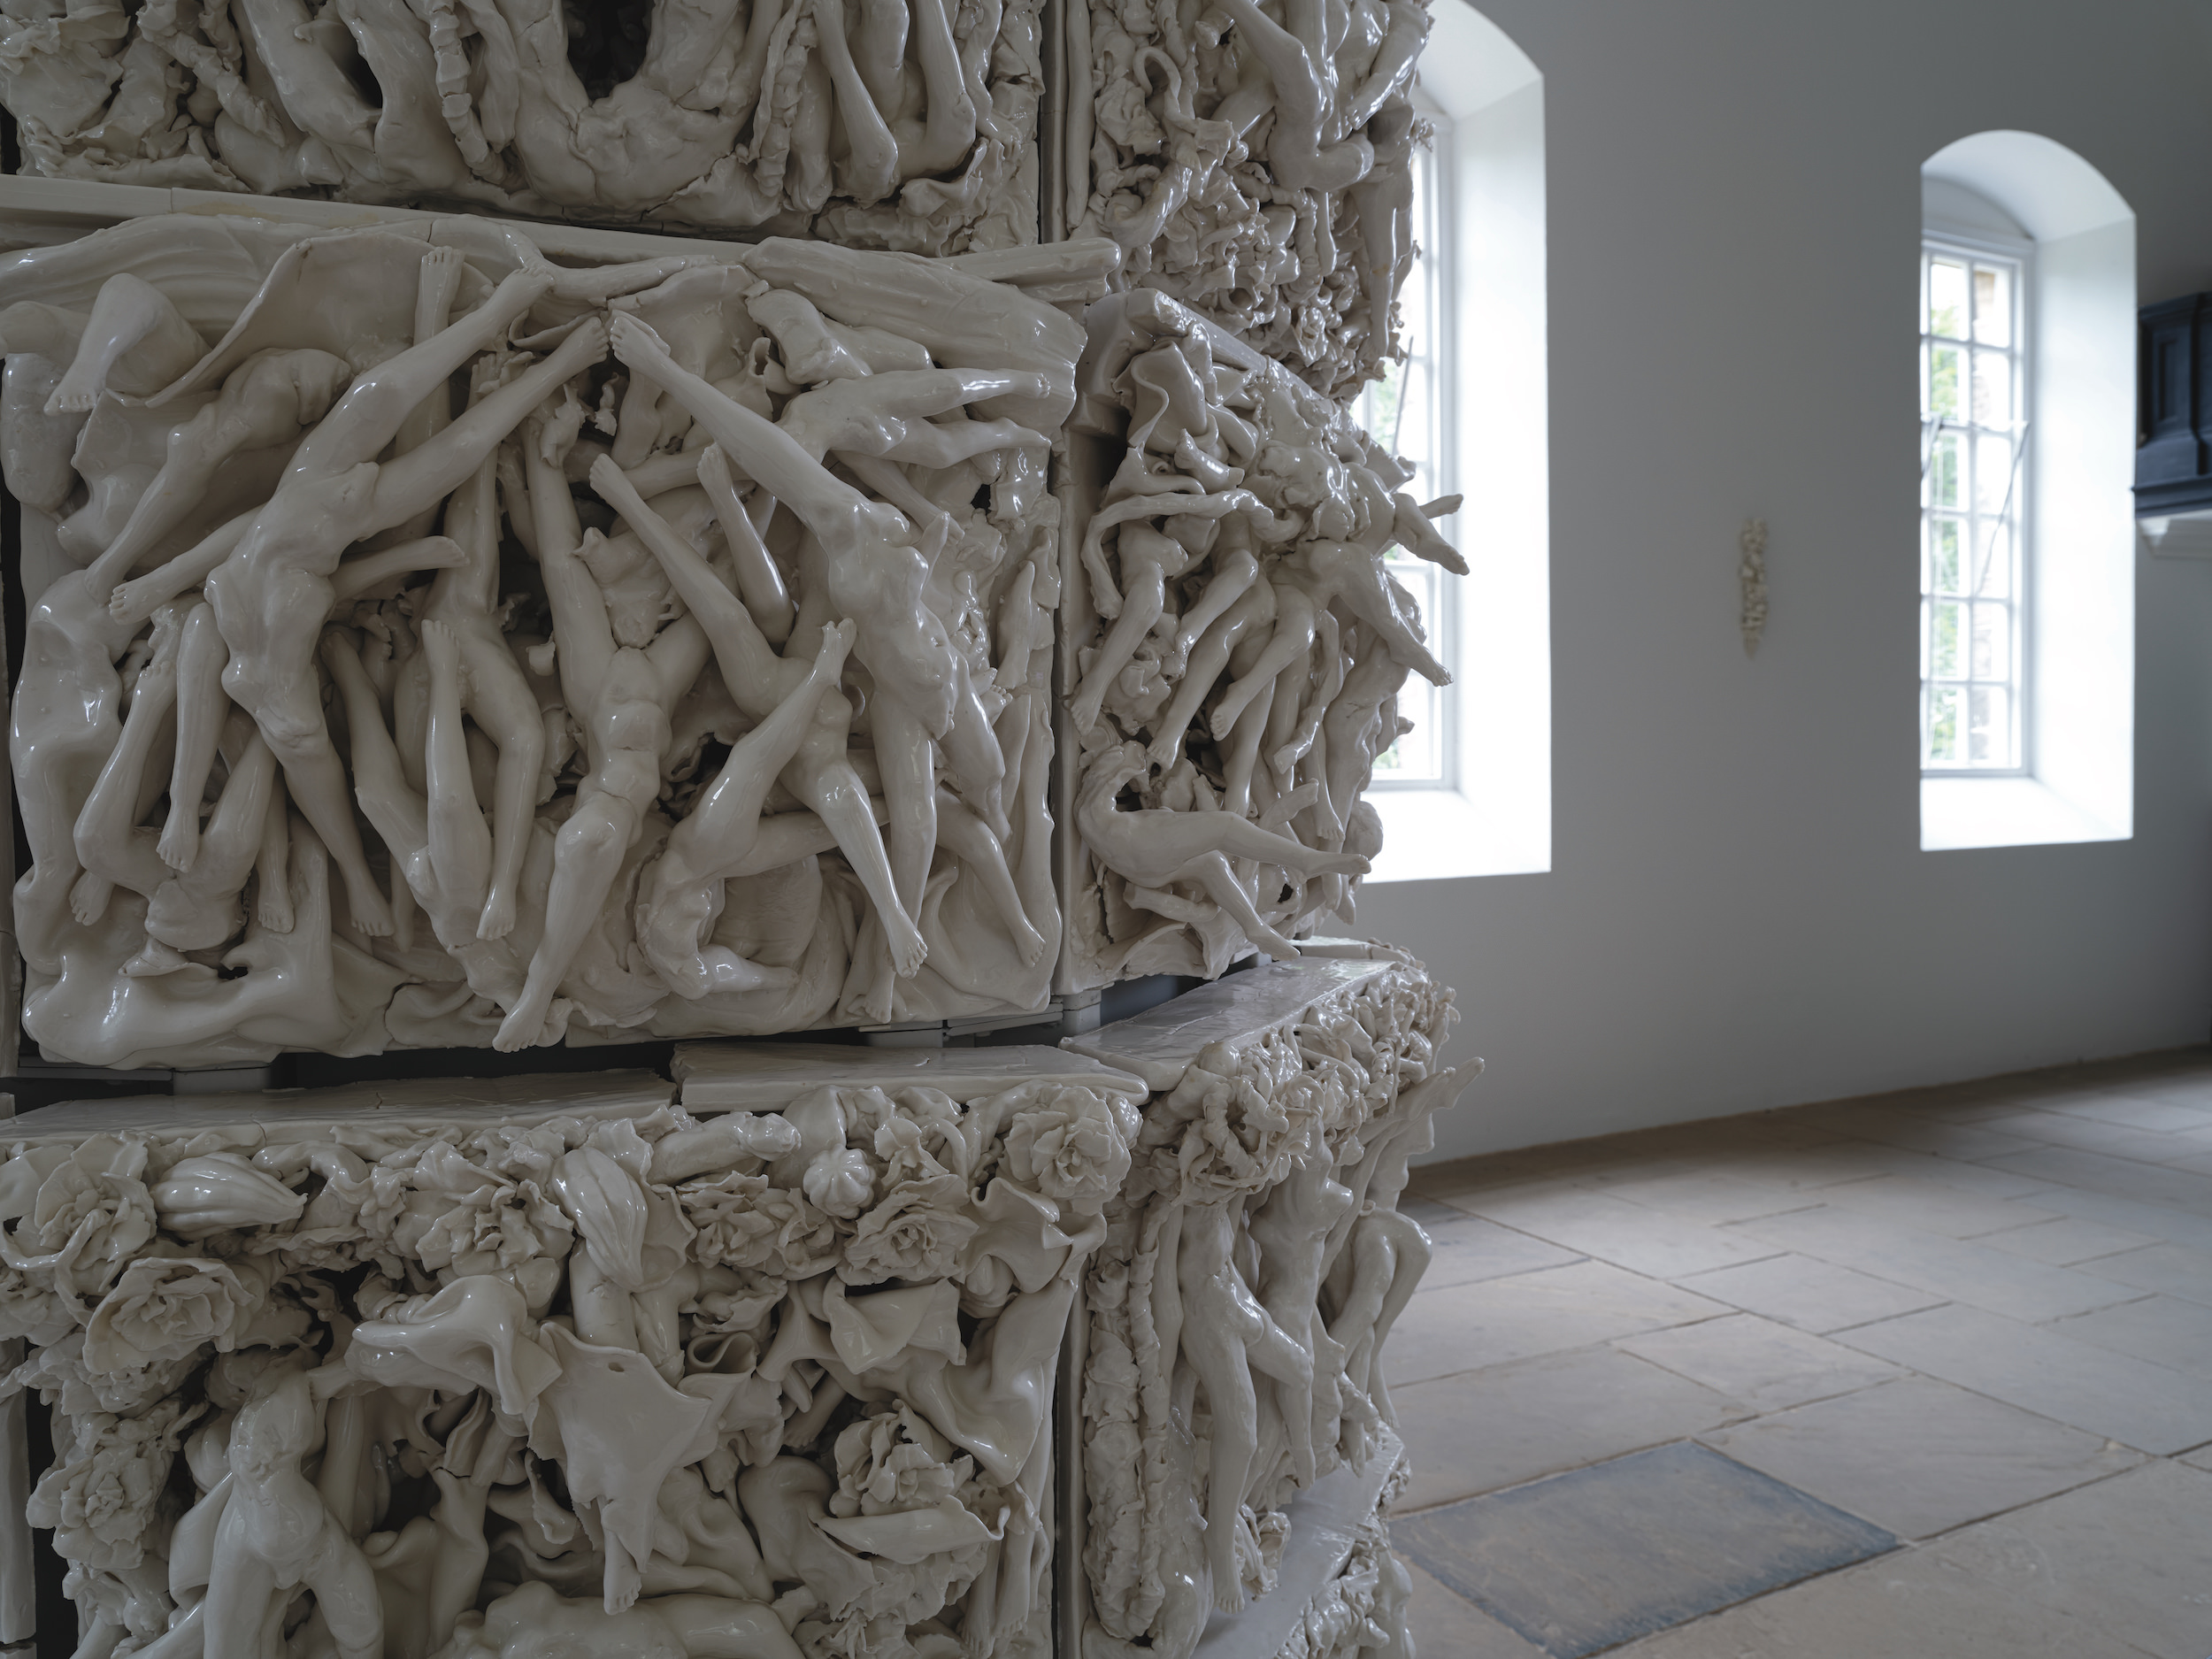 Multiple porcelain tiles of legs and torsos intertwined.